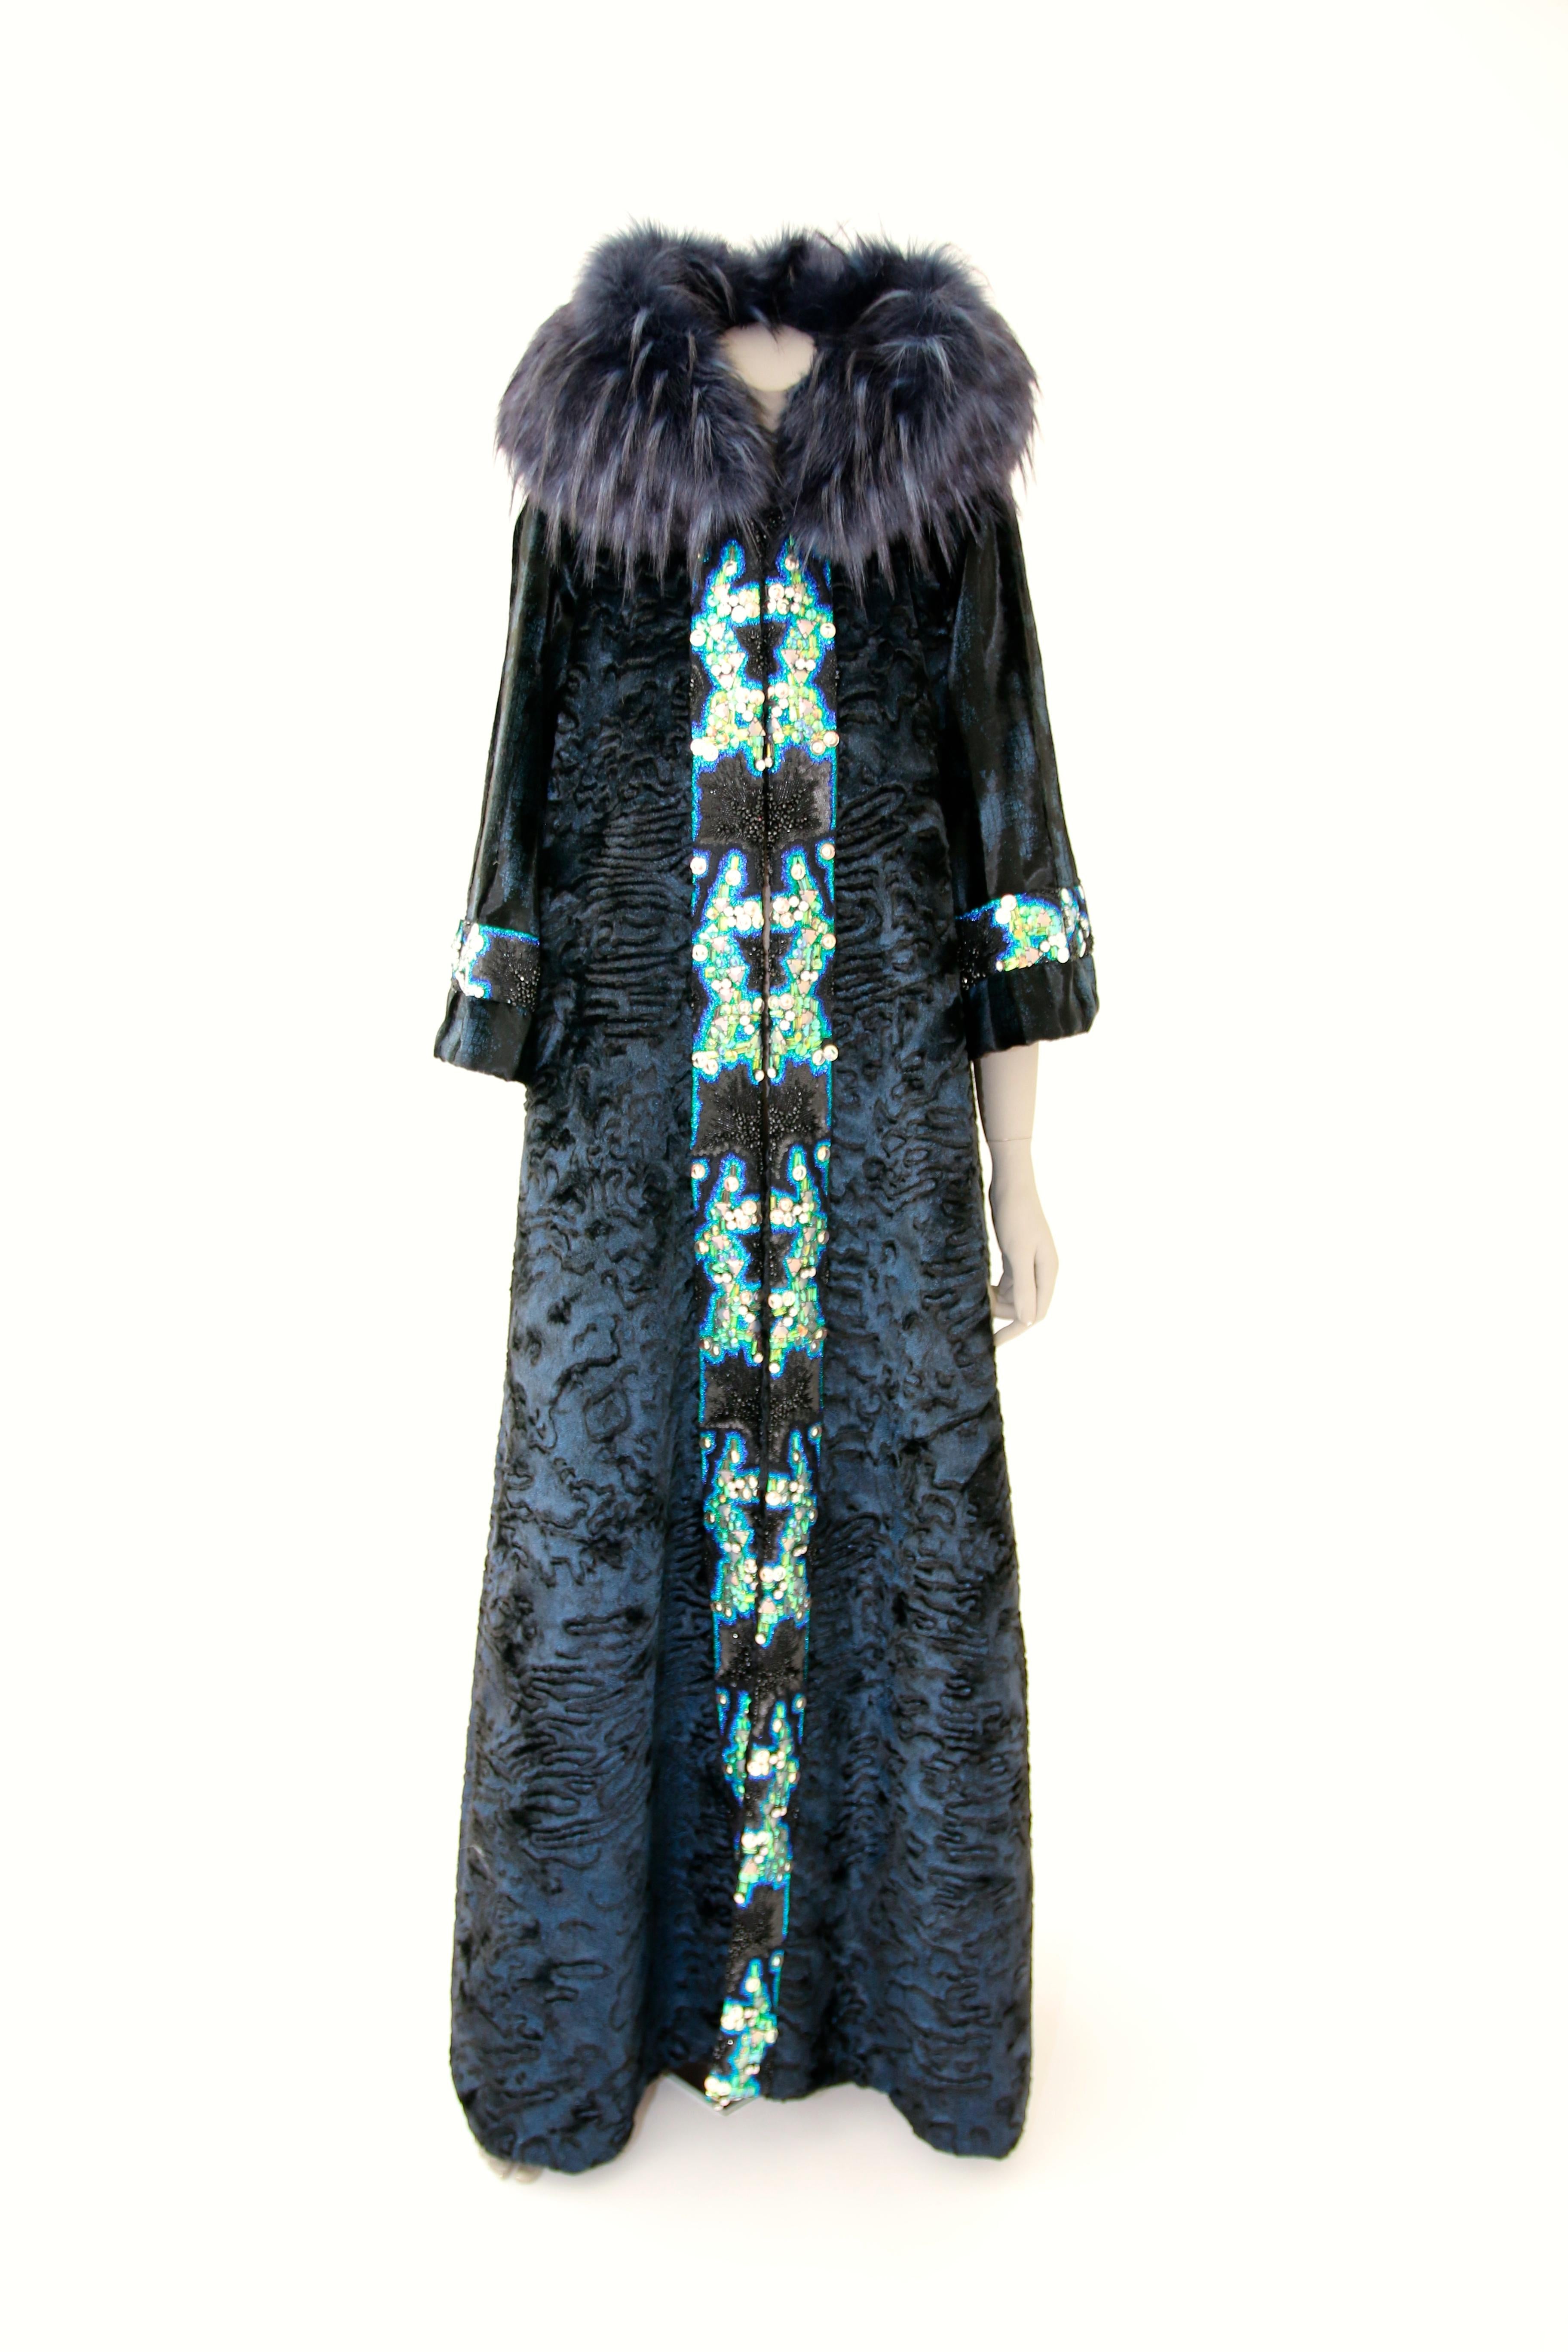 The Regina Pelush blue faux fur Astrakhan caftan coat with embroidery is a one of a kind exclusive Couture piece. This striking eye-catching fur free coat is crafted with the highest quality man made pelage for Pelush. The rich and sumptuous fabric